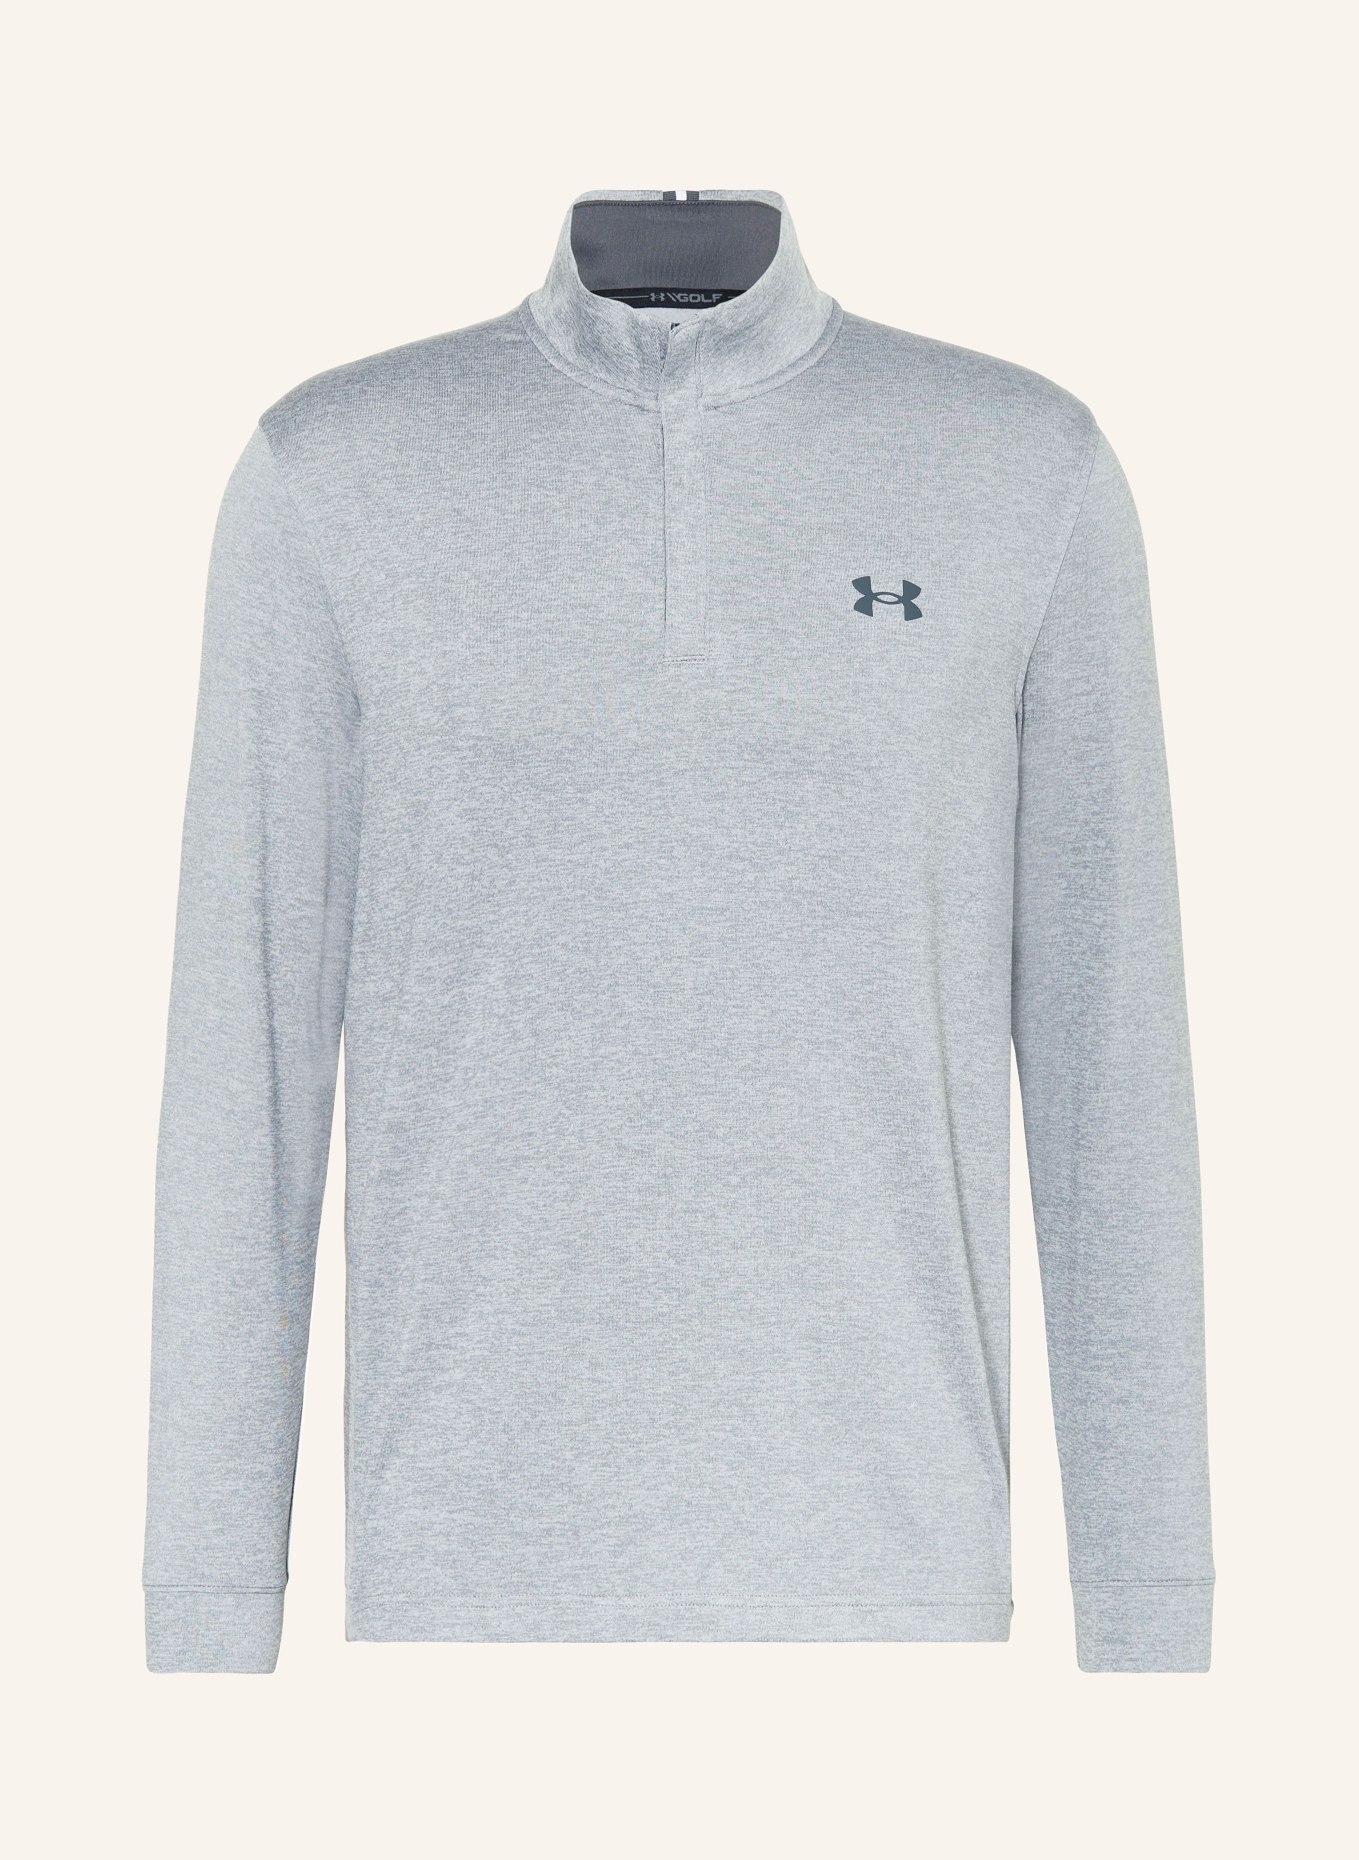 UNDER ARMOUR Long sleeve shirt with UV protection 50+, Color: GRAY (Image 1)